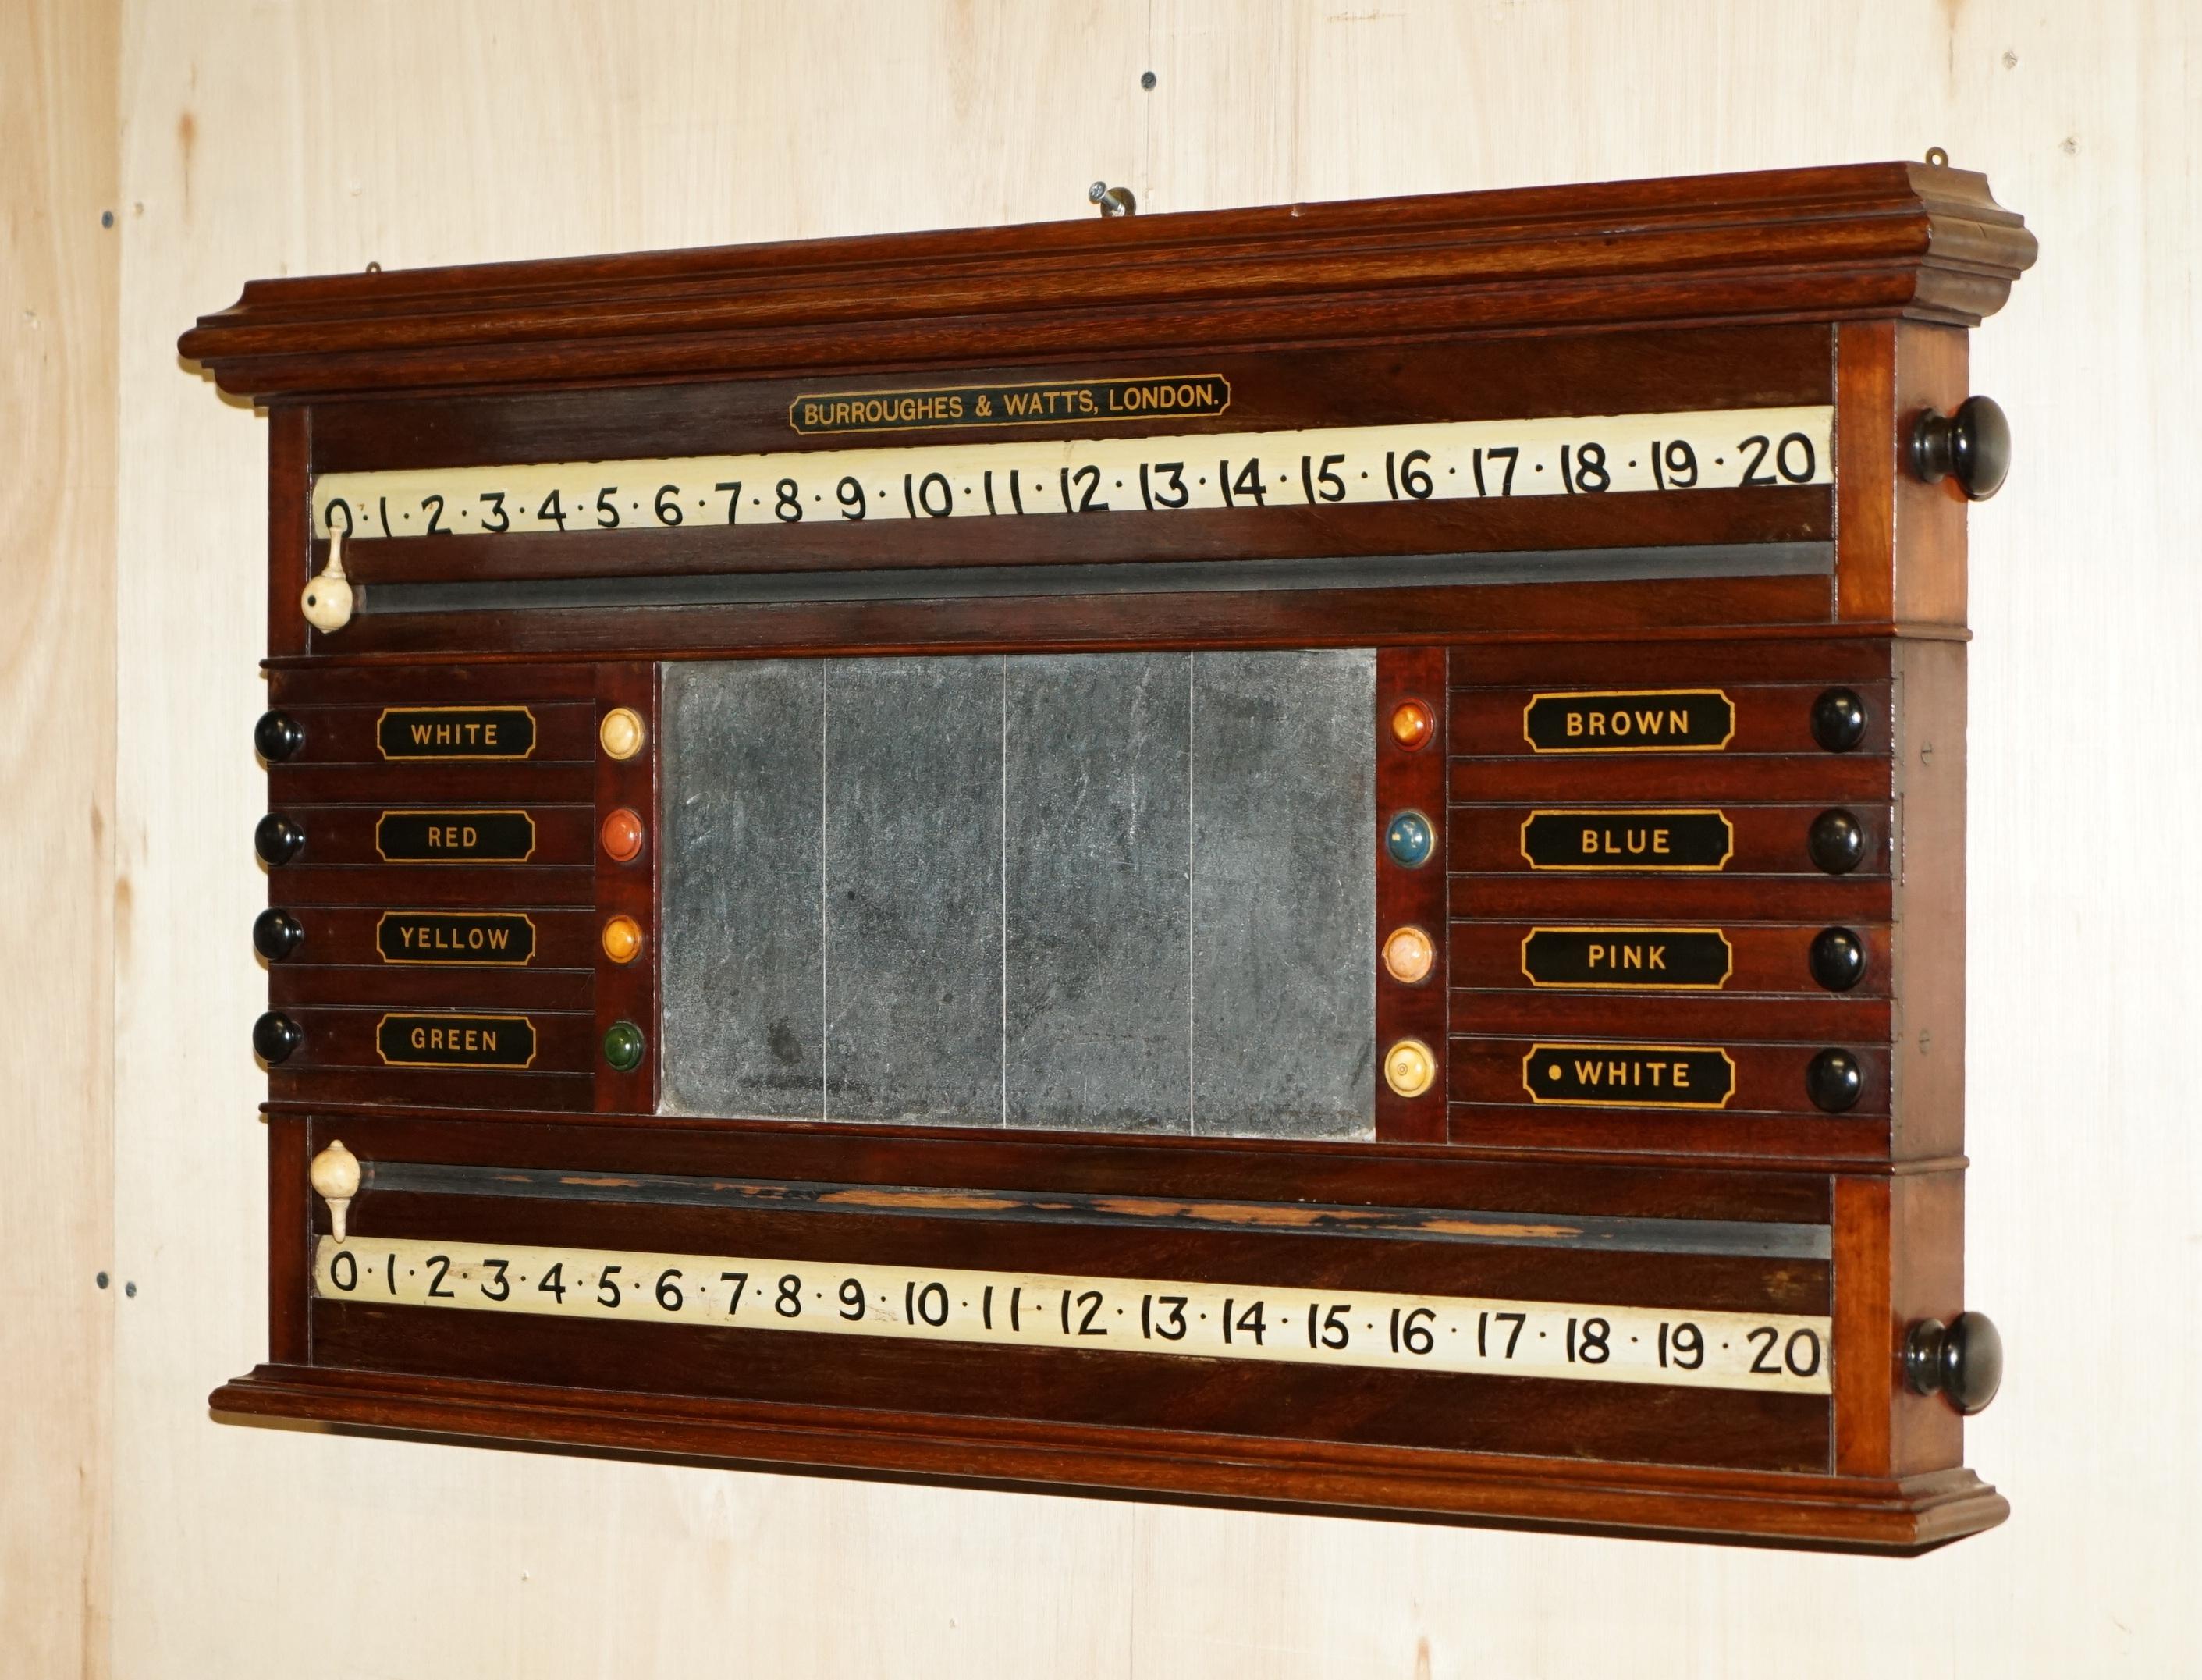 Royal House Antiques

Royal House Antiques is delighted to offer for sale this absolutely exquisite fully restored Burroughes & Watts London Mahogany Snooker scoreboard

A truly stunning example of Victorian Snooker equipment, this piece really